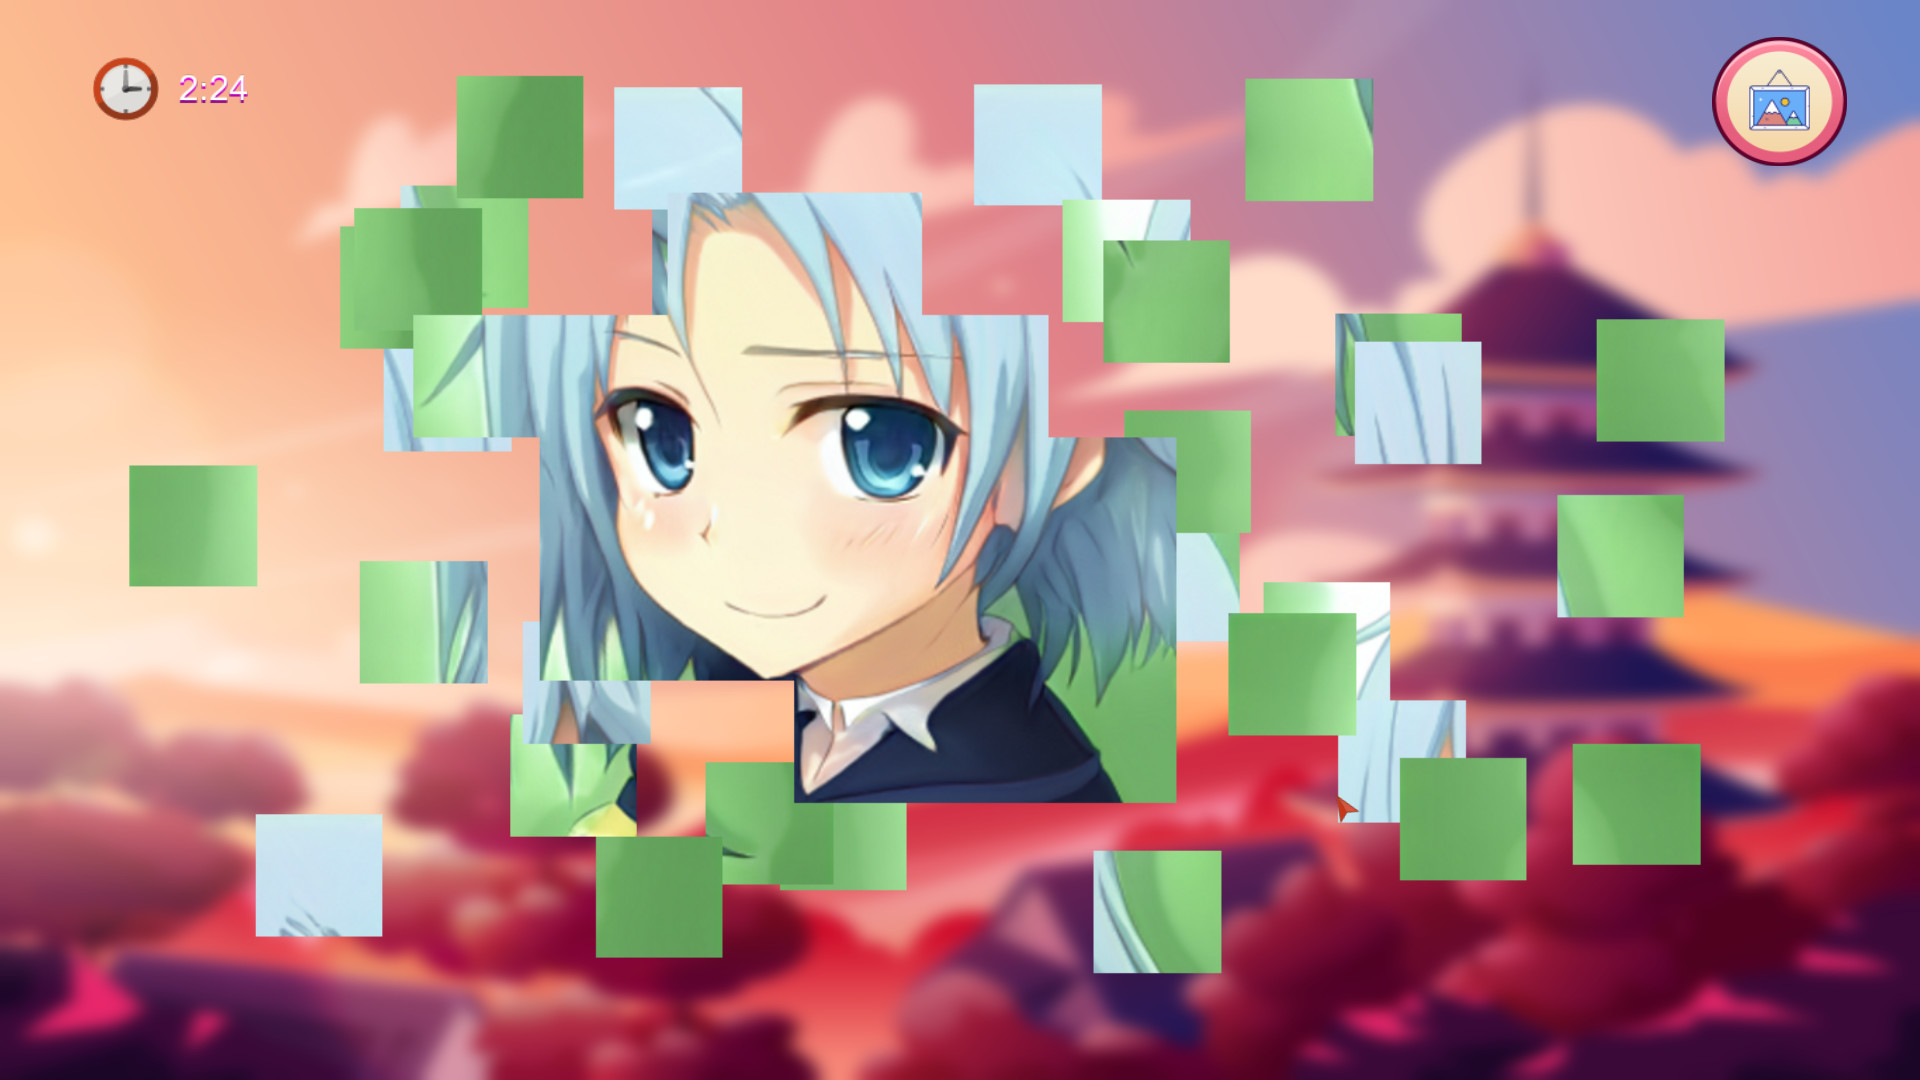 Anime puzzle Free Download